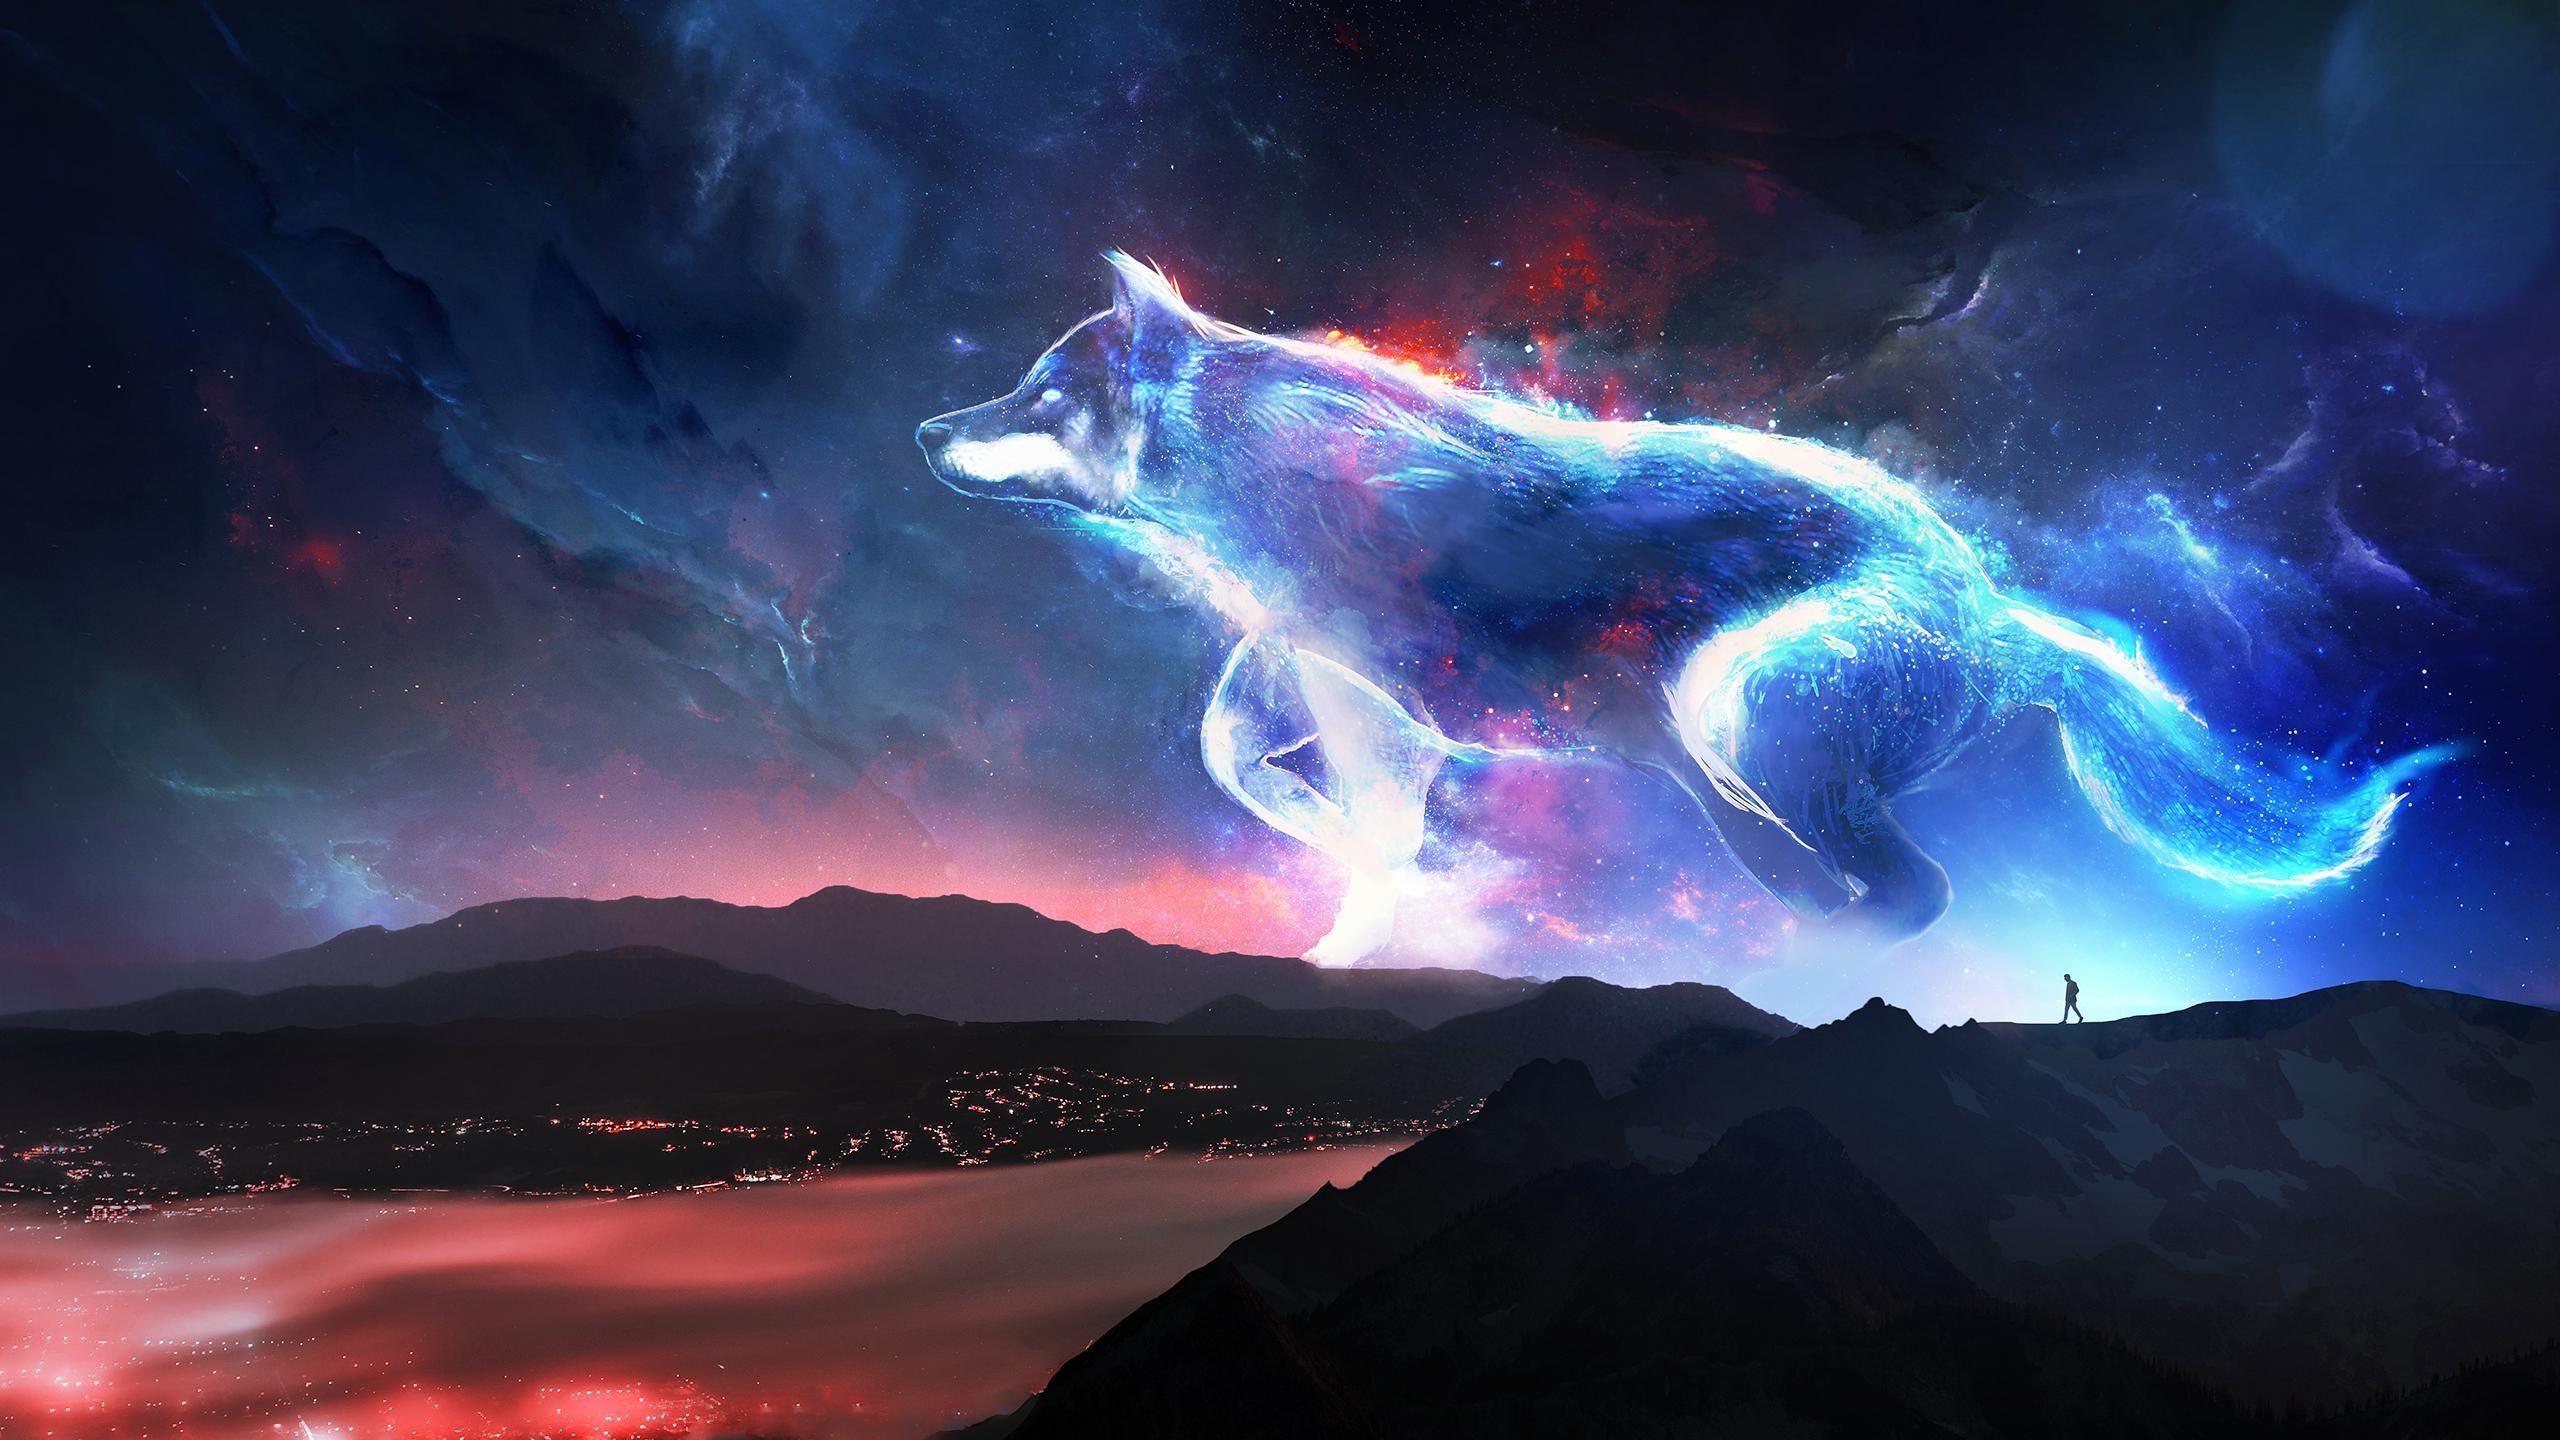 Night Wolf Wallpaper, image collections of wallpaper